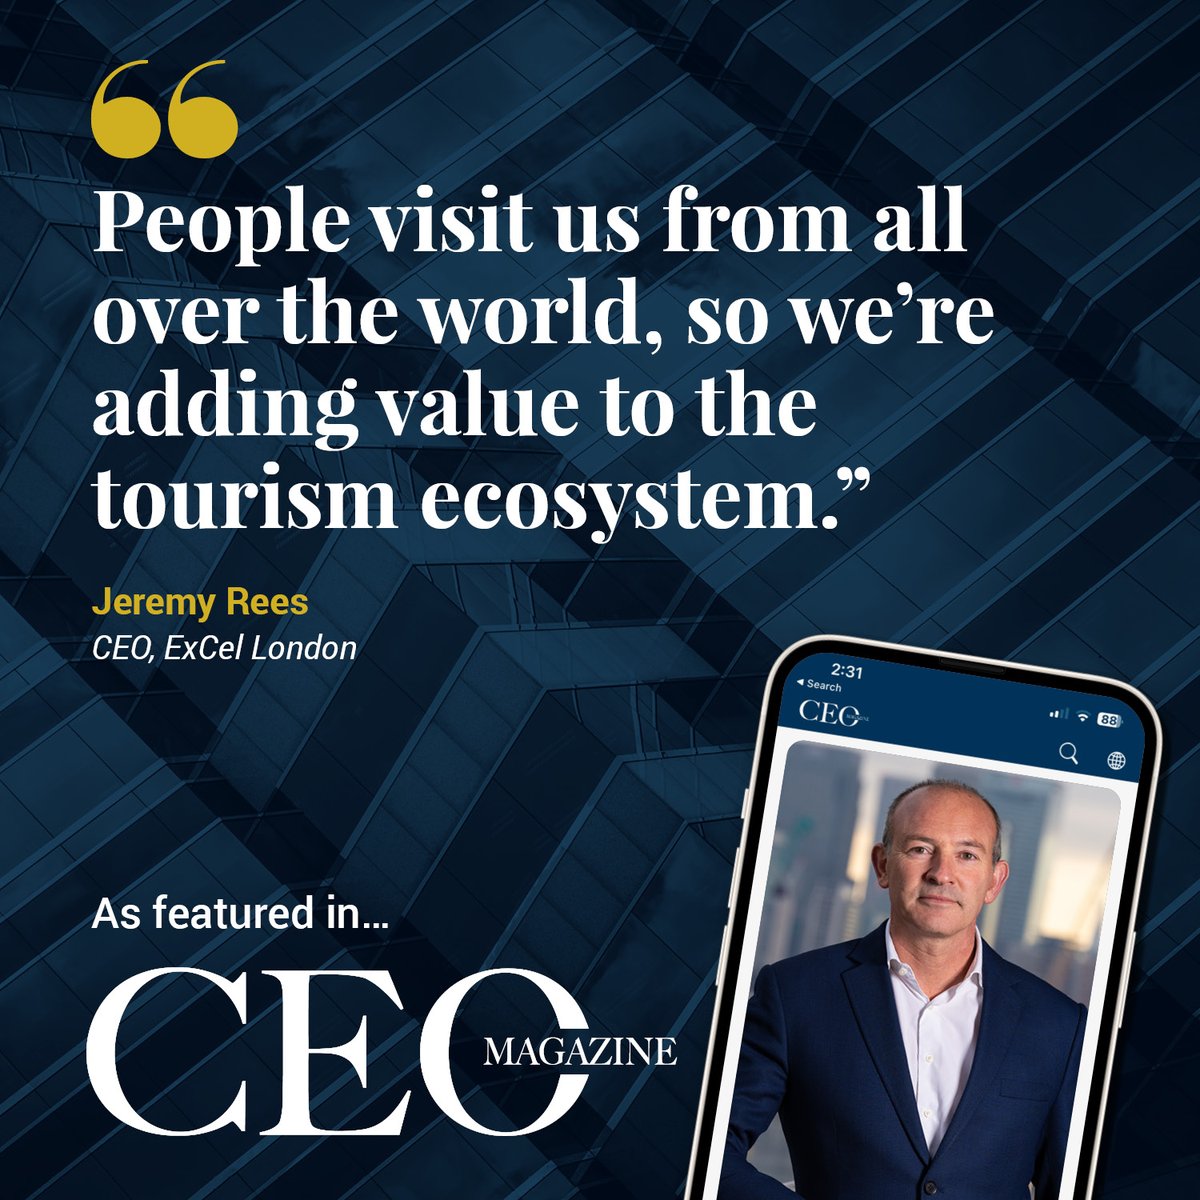 INTERVIEW: #ExCeLLondon CEO Jeremy Rees talks to @CEOMagazineGL on the venue's milestone year - including expansions, world-class events and everything in between... Read full article: bit.ly/4bTHwcI #EventsIndustry #Business #EventProfs